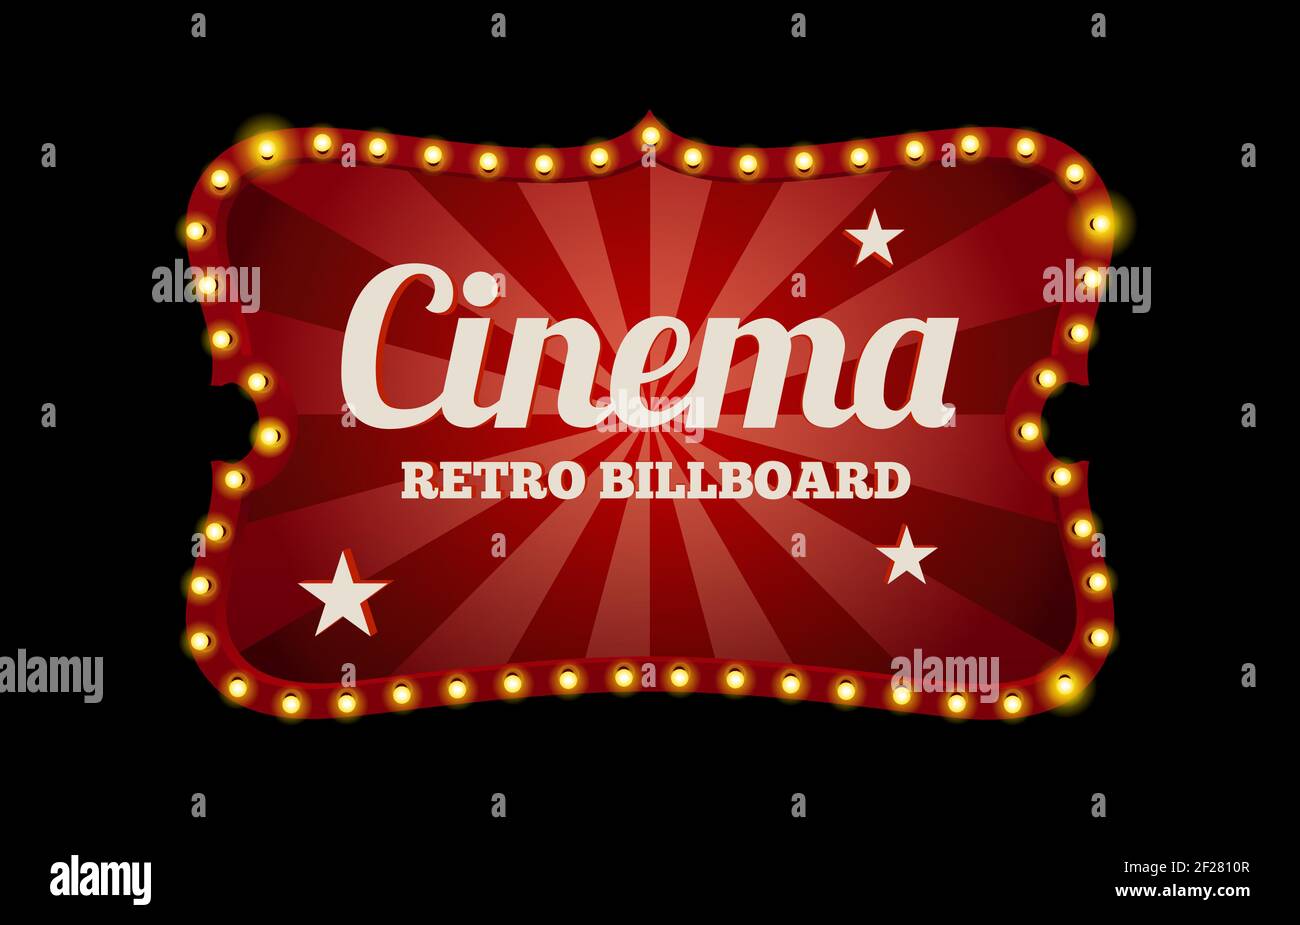 Cinema sign or billboard in retro style surrounded by neon lights on a dark background with text space Stock Vector